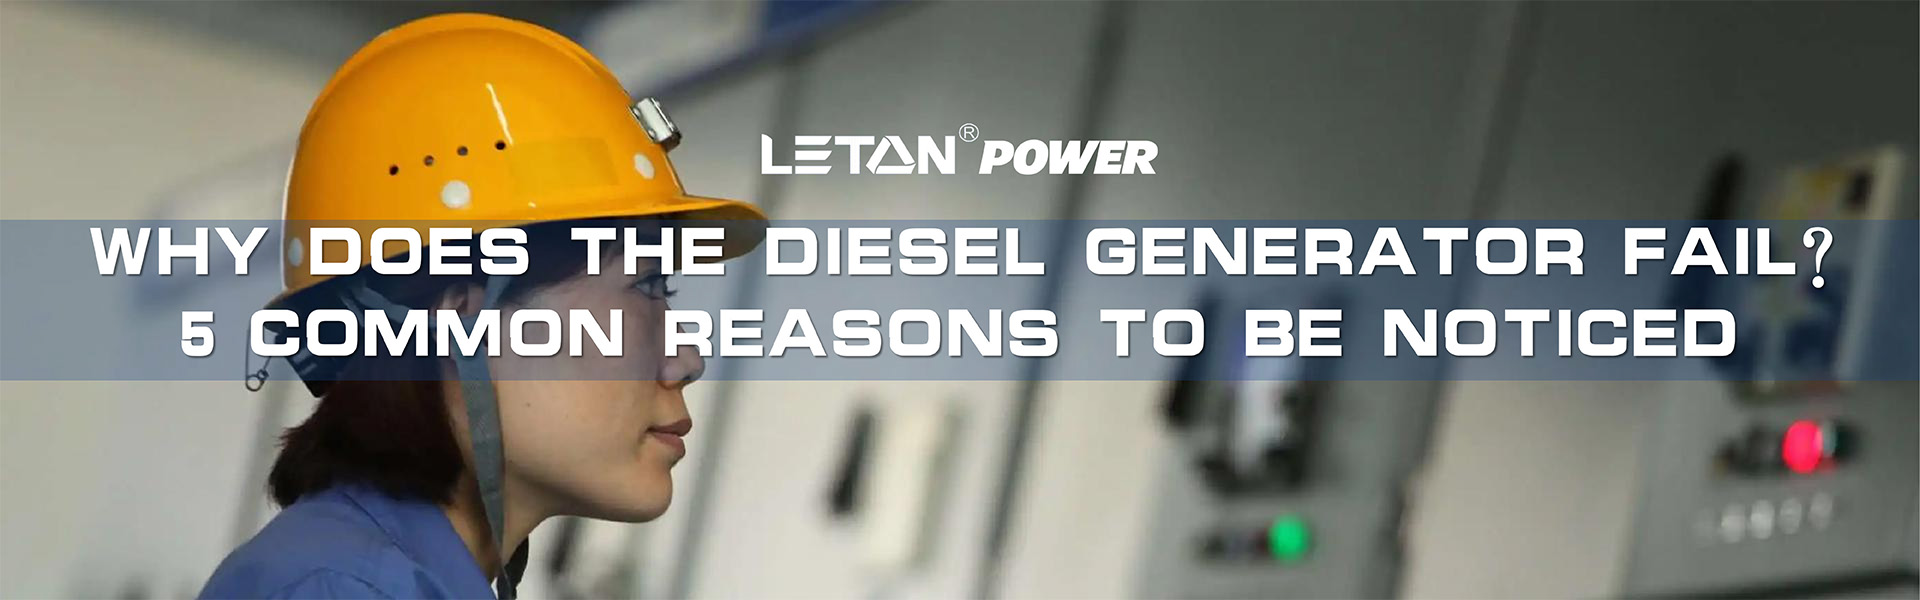 Why does the diesel generator fail? 5 Common Reasons to Be Noticed